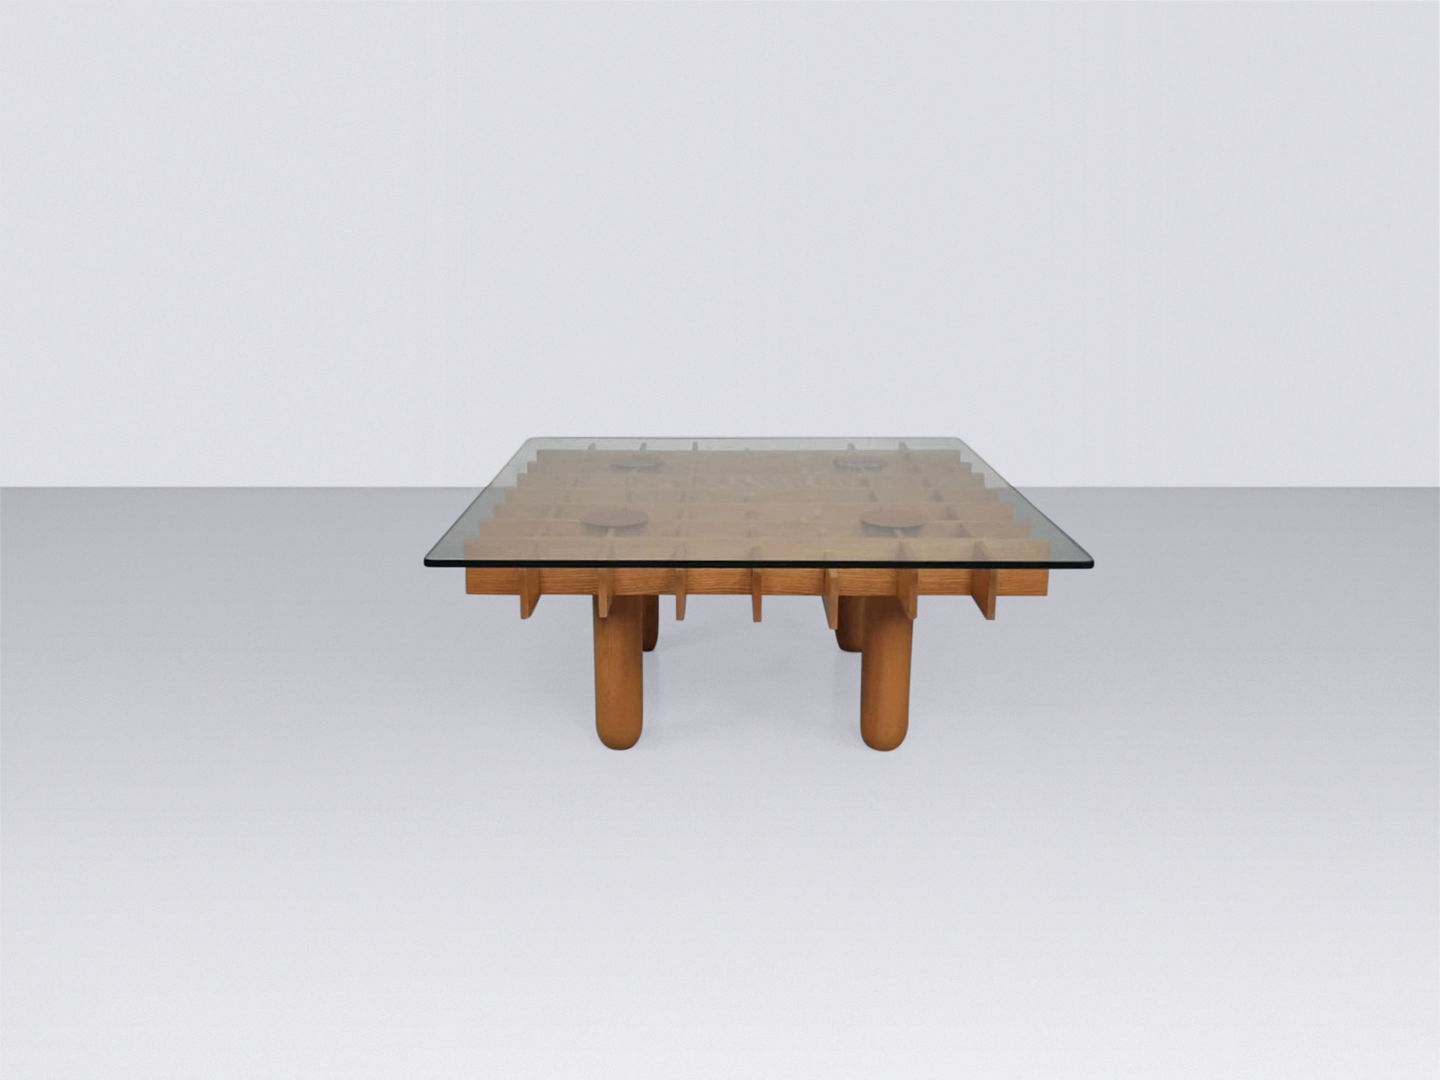 Kyoto graphic maple and glass coffee table by Gianfranco Frattini for Knoll 1970s